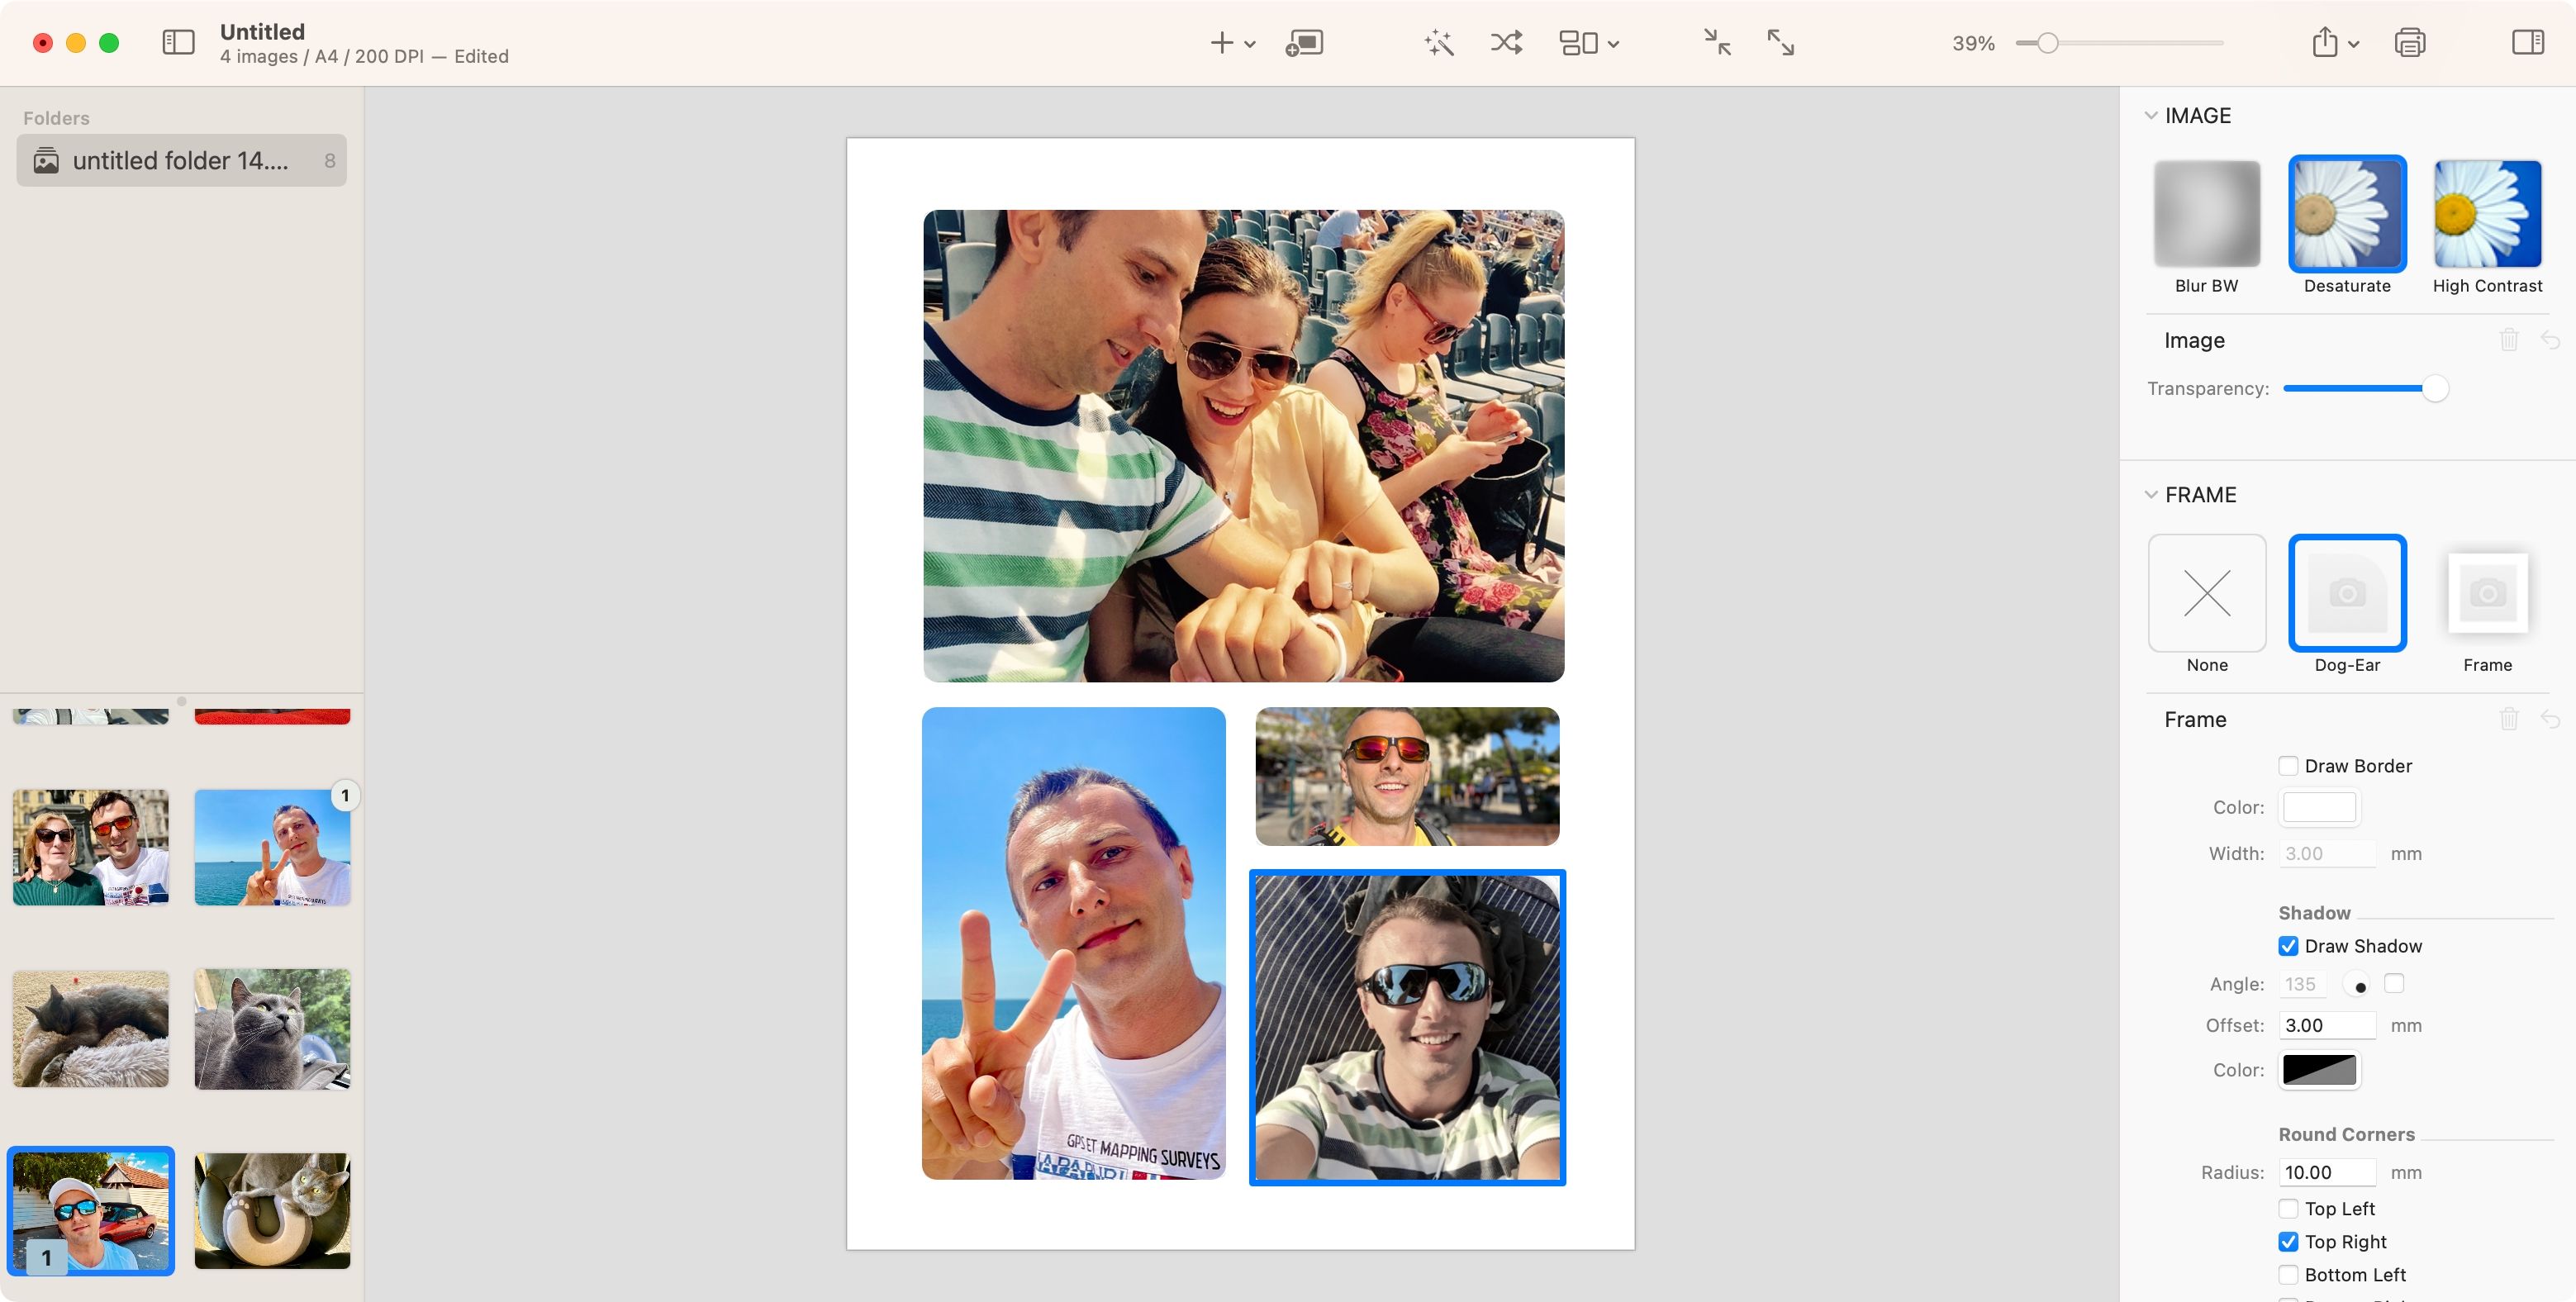 Creating an image collage using the Posterino Mac app